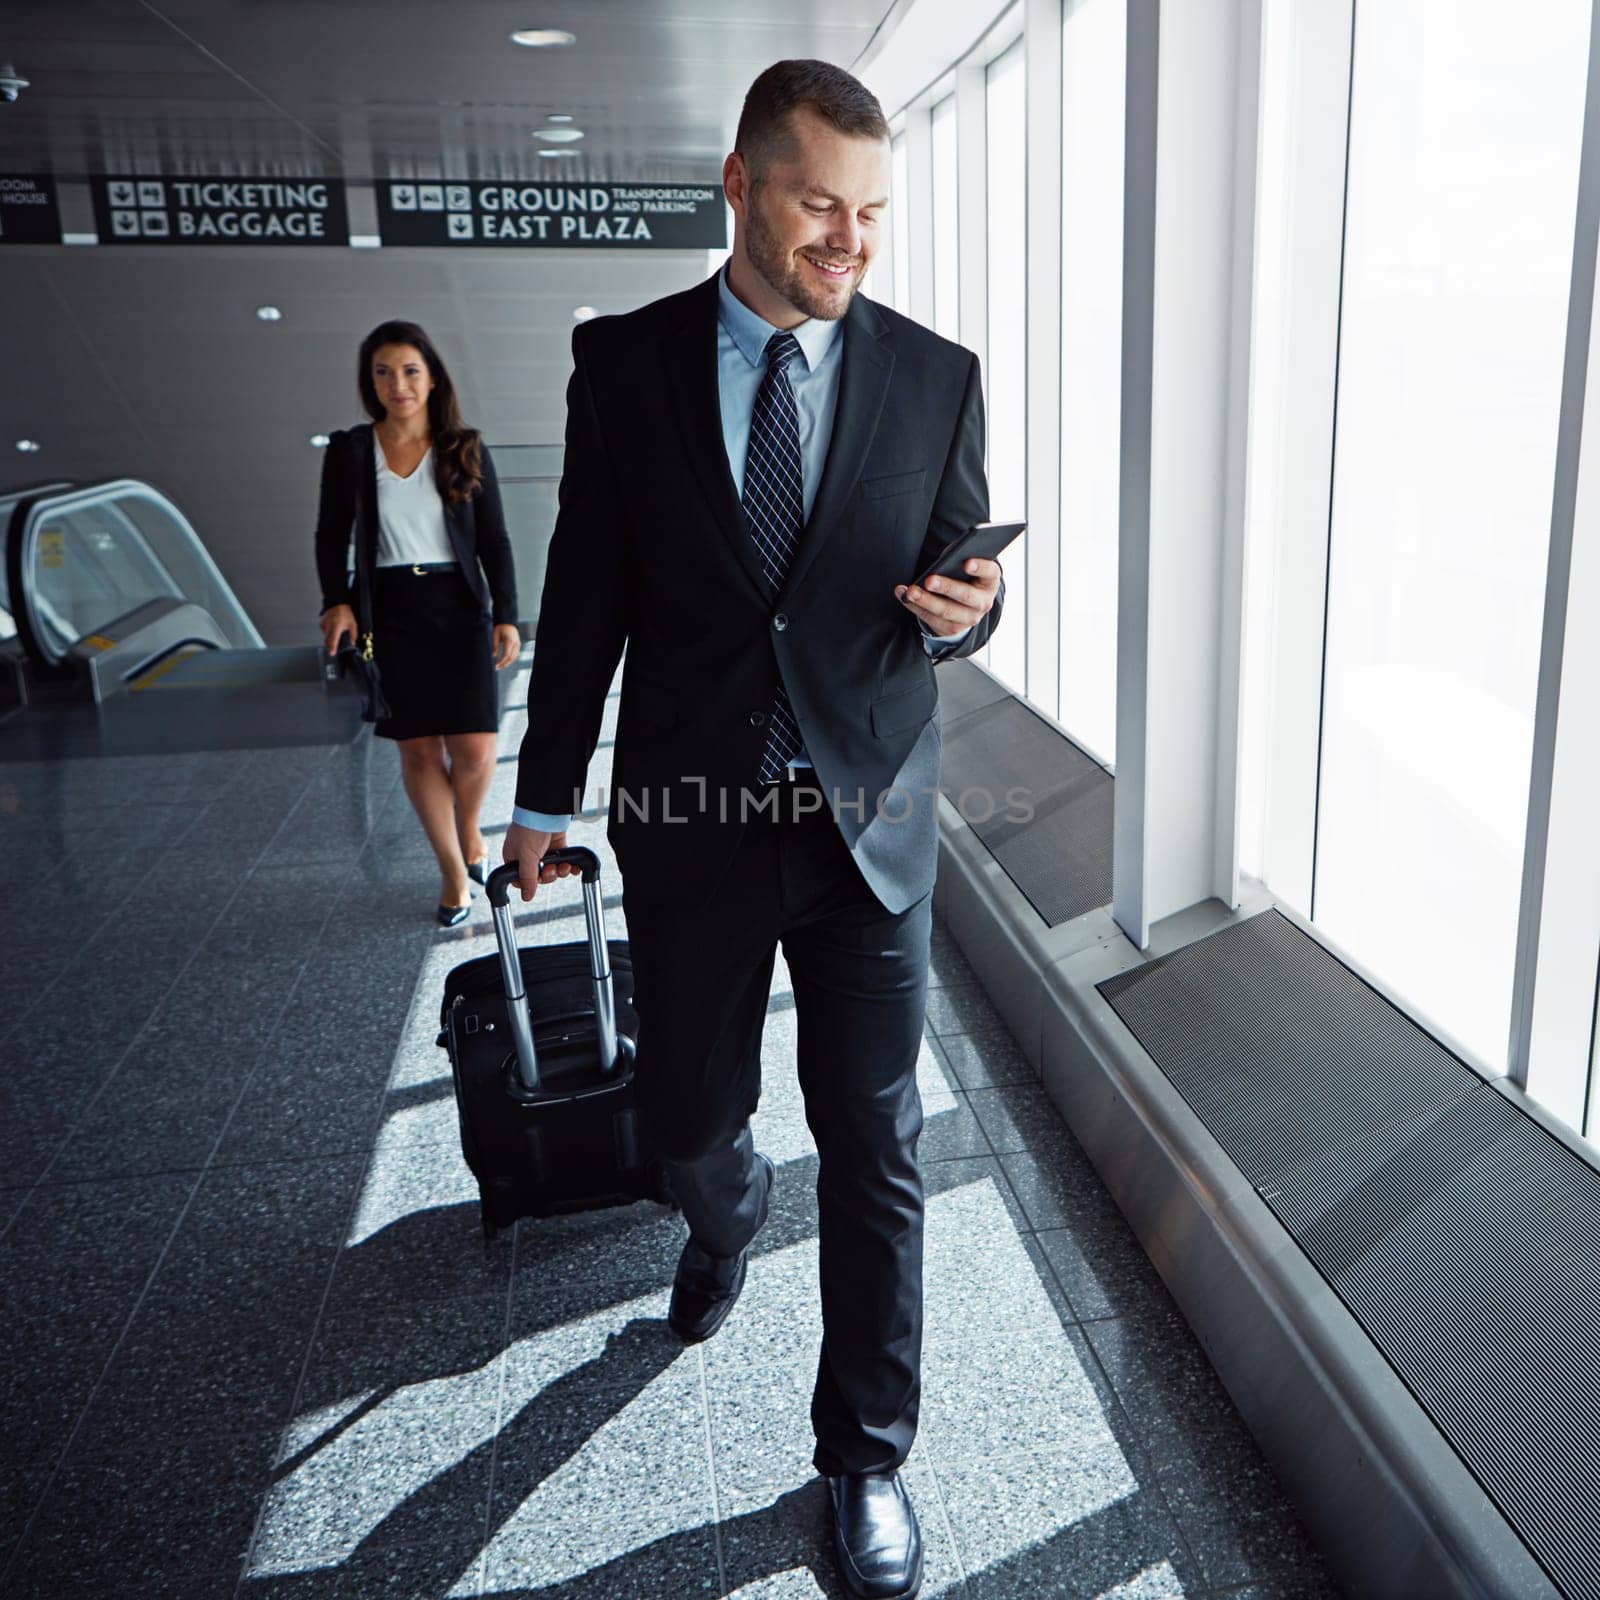 Now he can be online, anytime. two executive businesspeople walking through an airport during a business trip